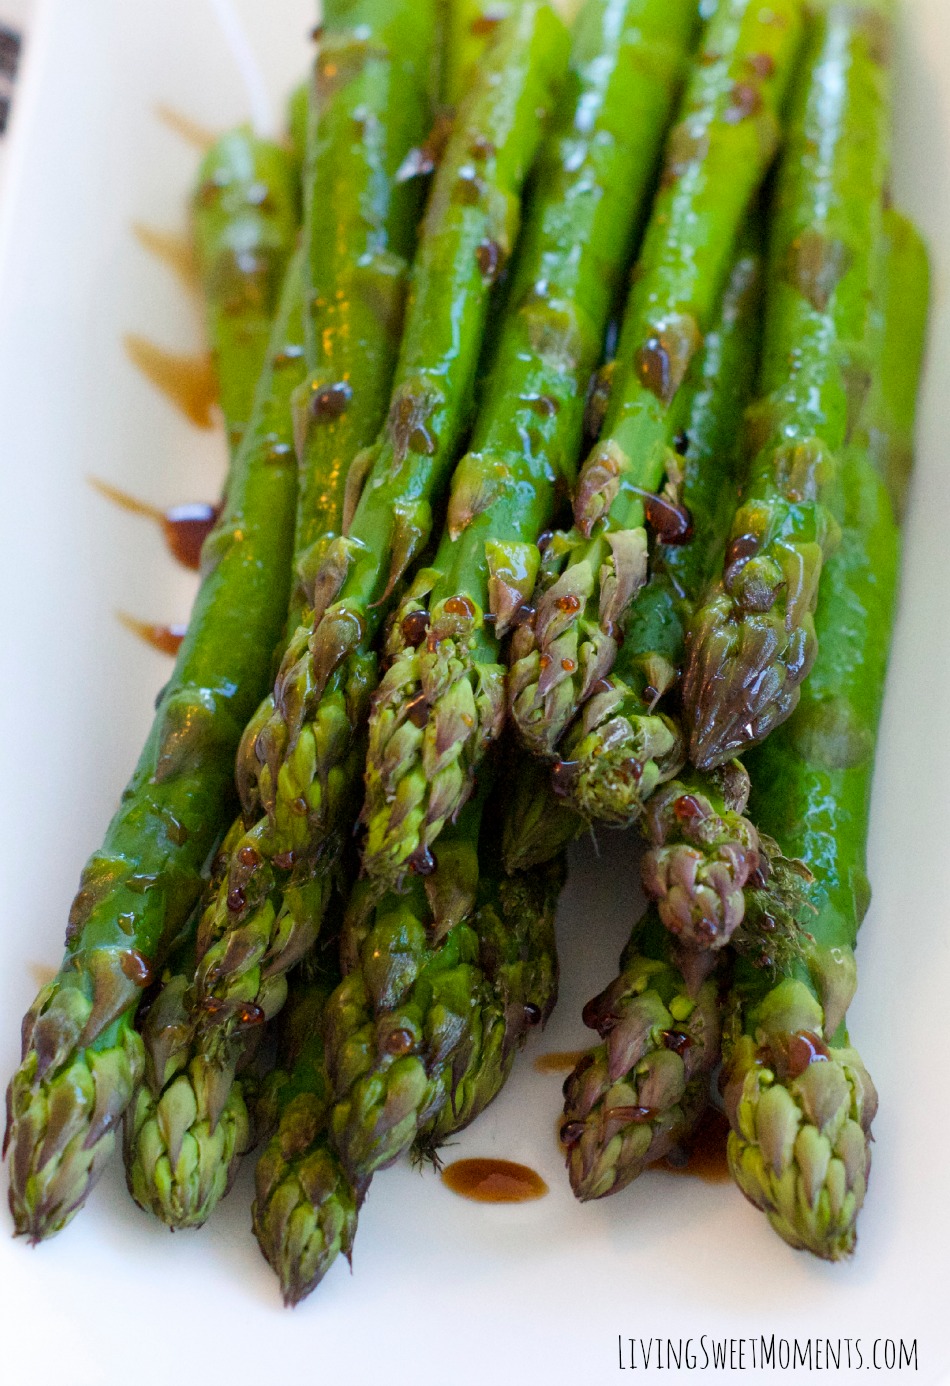 This delicious Lemon Balsamic Asparagus Recipe is perfect for a quick and healthy side dish weeknight meal. It's tangy, sweet and very flavorful. 